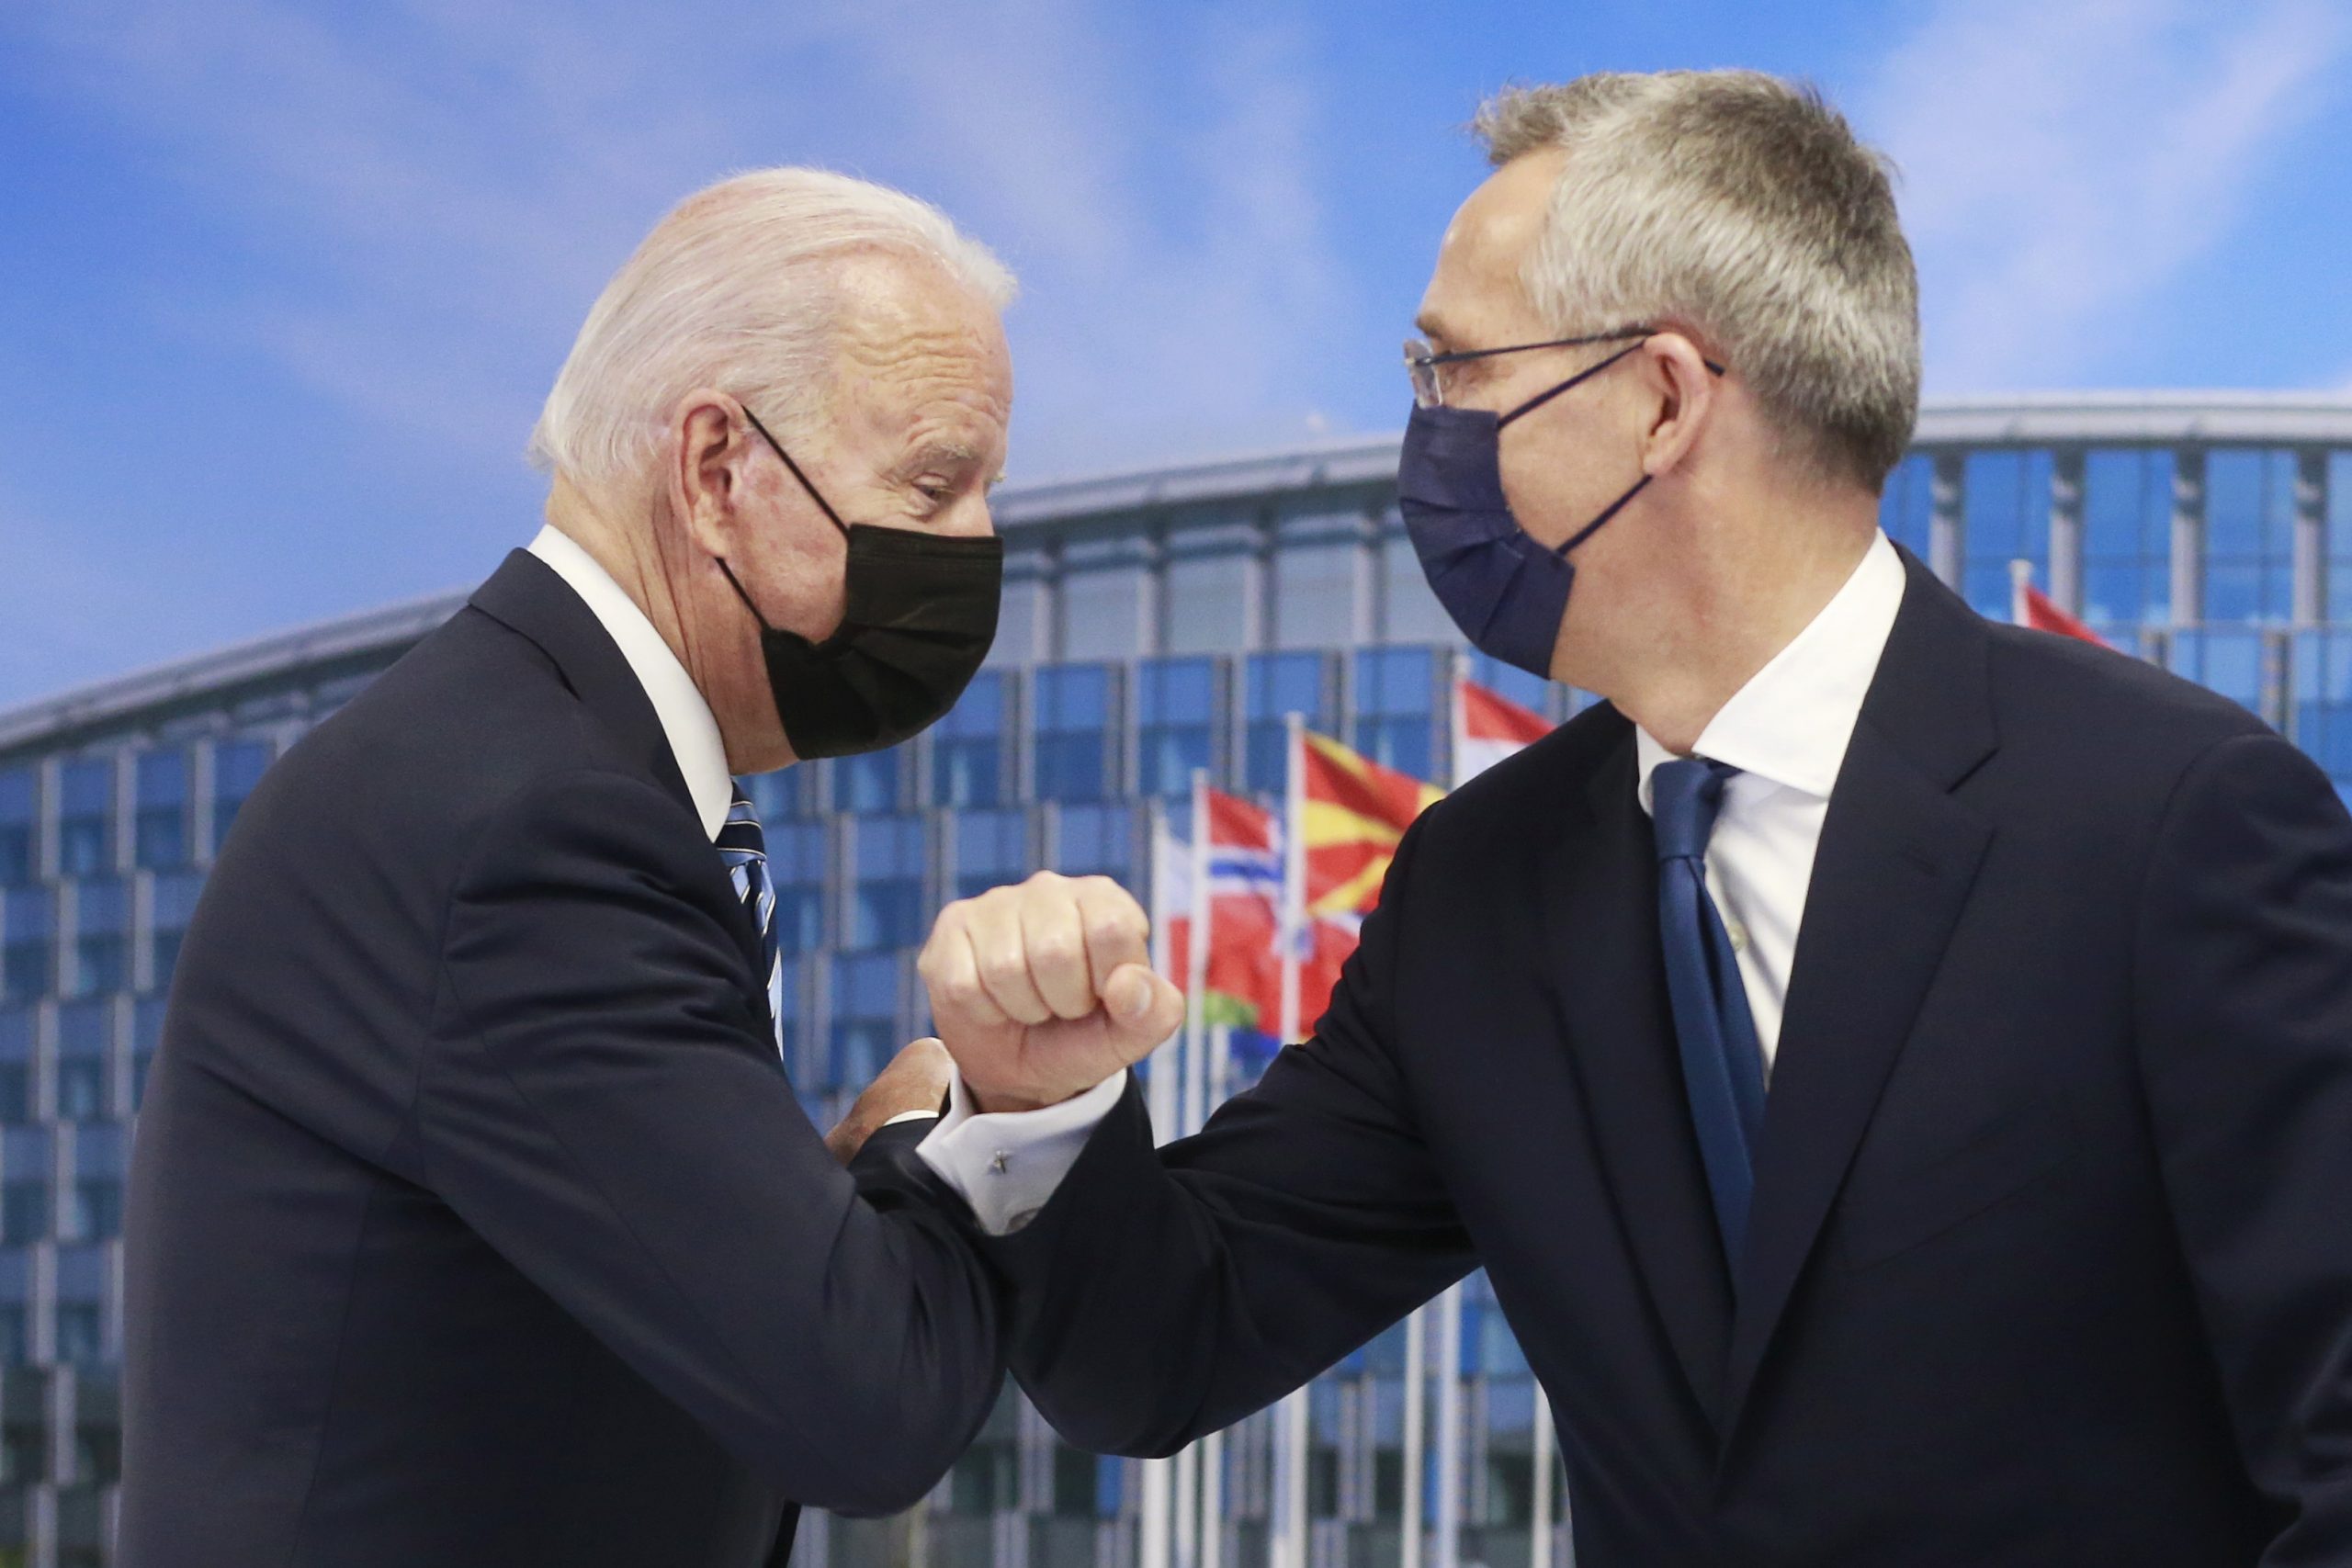 epa09269800 US President Joe Biden (L) and NATO Secretary General Jens Stoltenberg (R) greet each other with their elbows during a NATO summit at the North Atlantic Treaty Organization (NATO) headquarters in Brussels, Belgium, 14 June 2021. The 30-nation alliance hopes to reaffirm its unity and discuss increasingly tense relations with China and Russia, as the organization pulls its troops out after 18 years in Afghanistan.  EPA/STEPHANIE LECOCQ / POOL